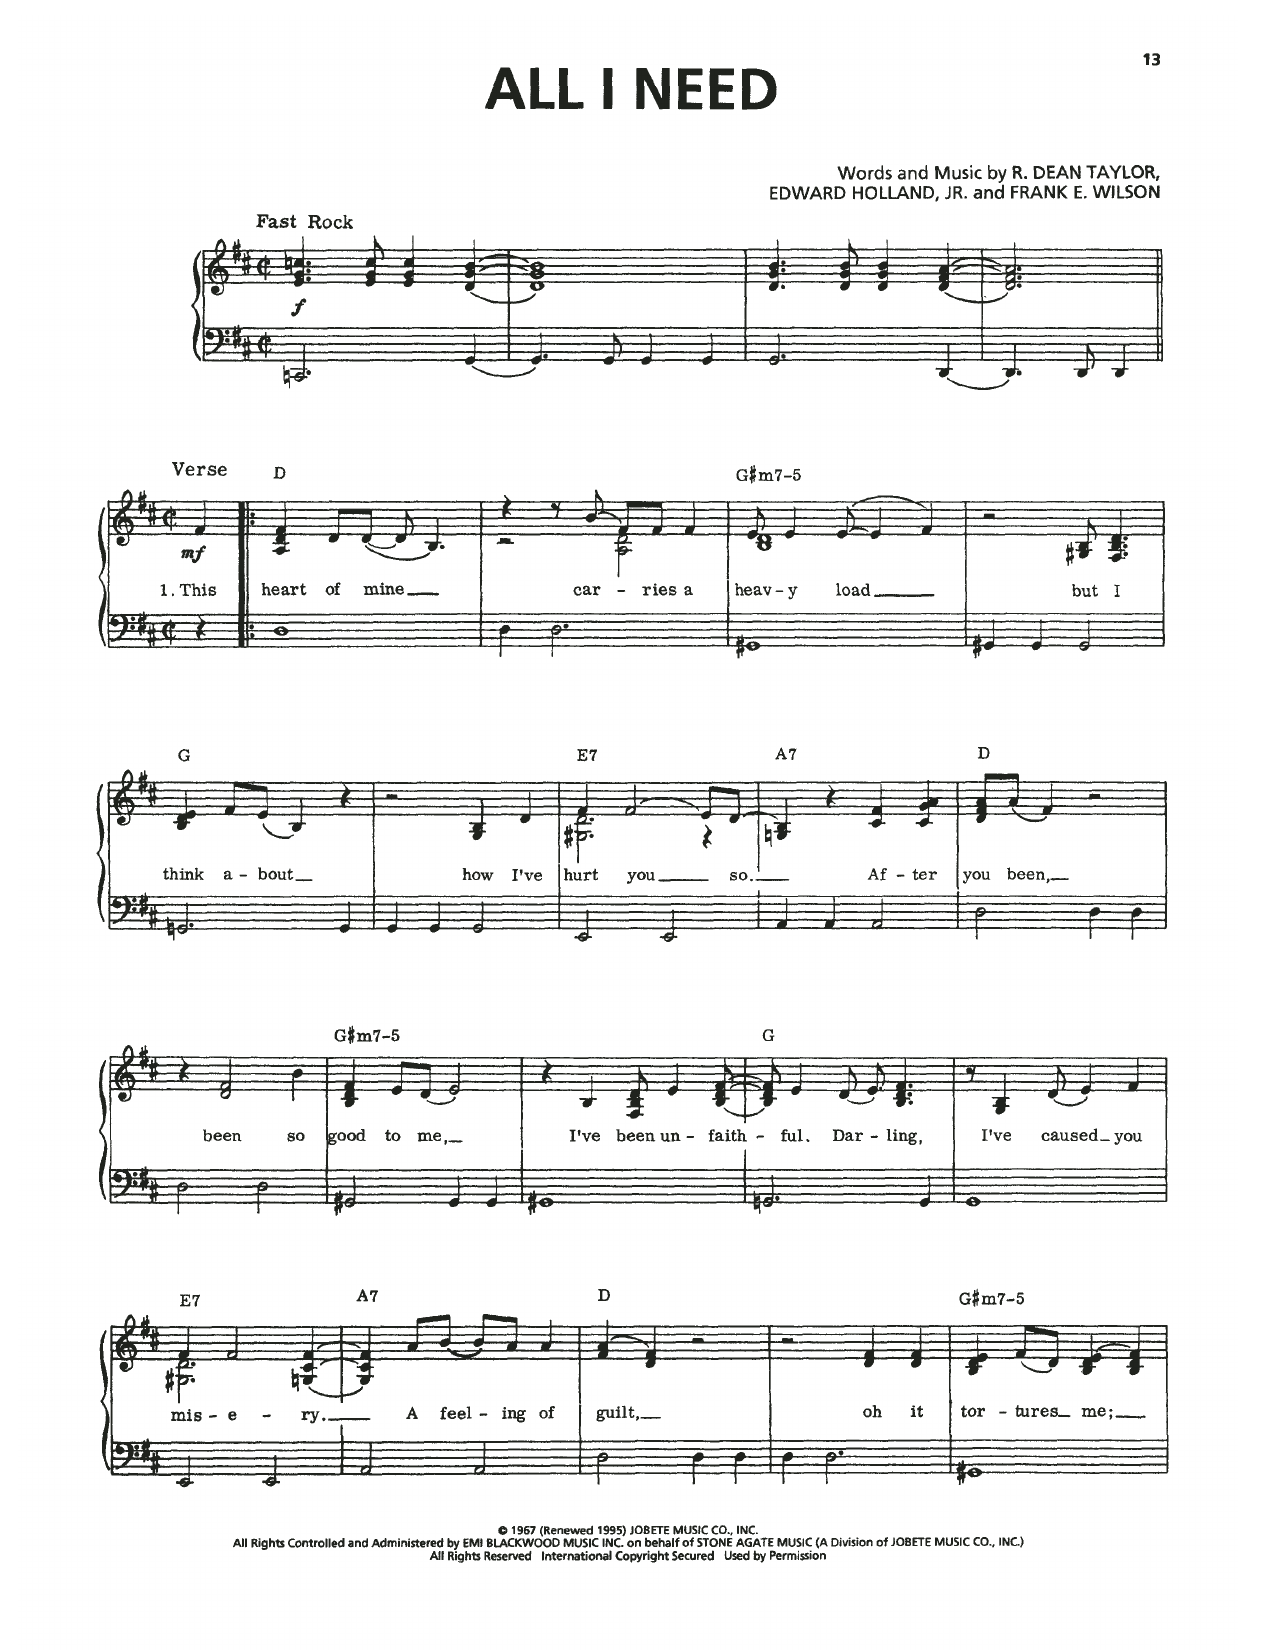 Download The Temptations All I Need Sheet Music